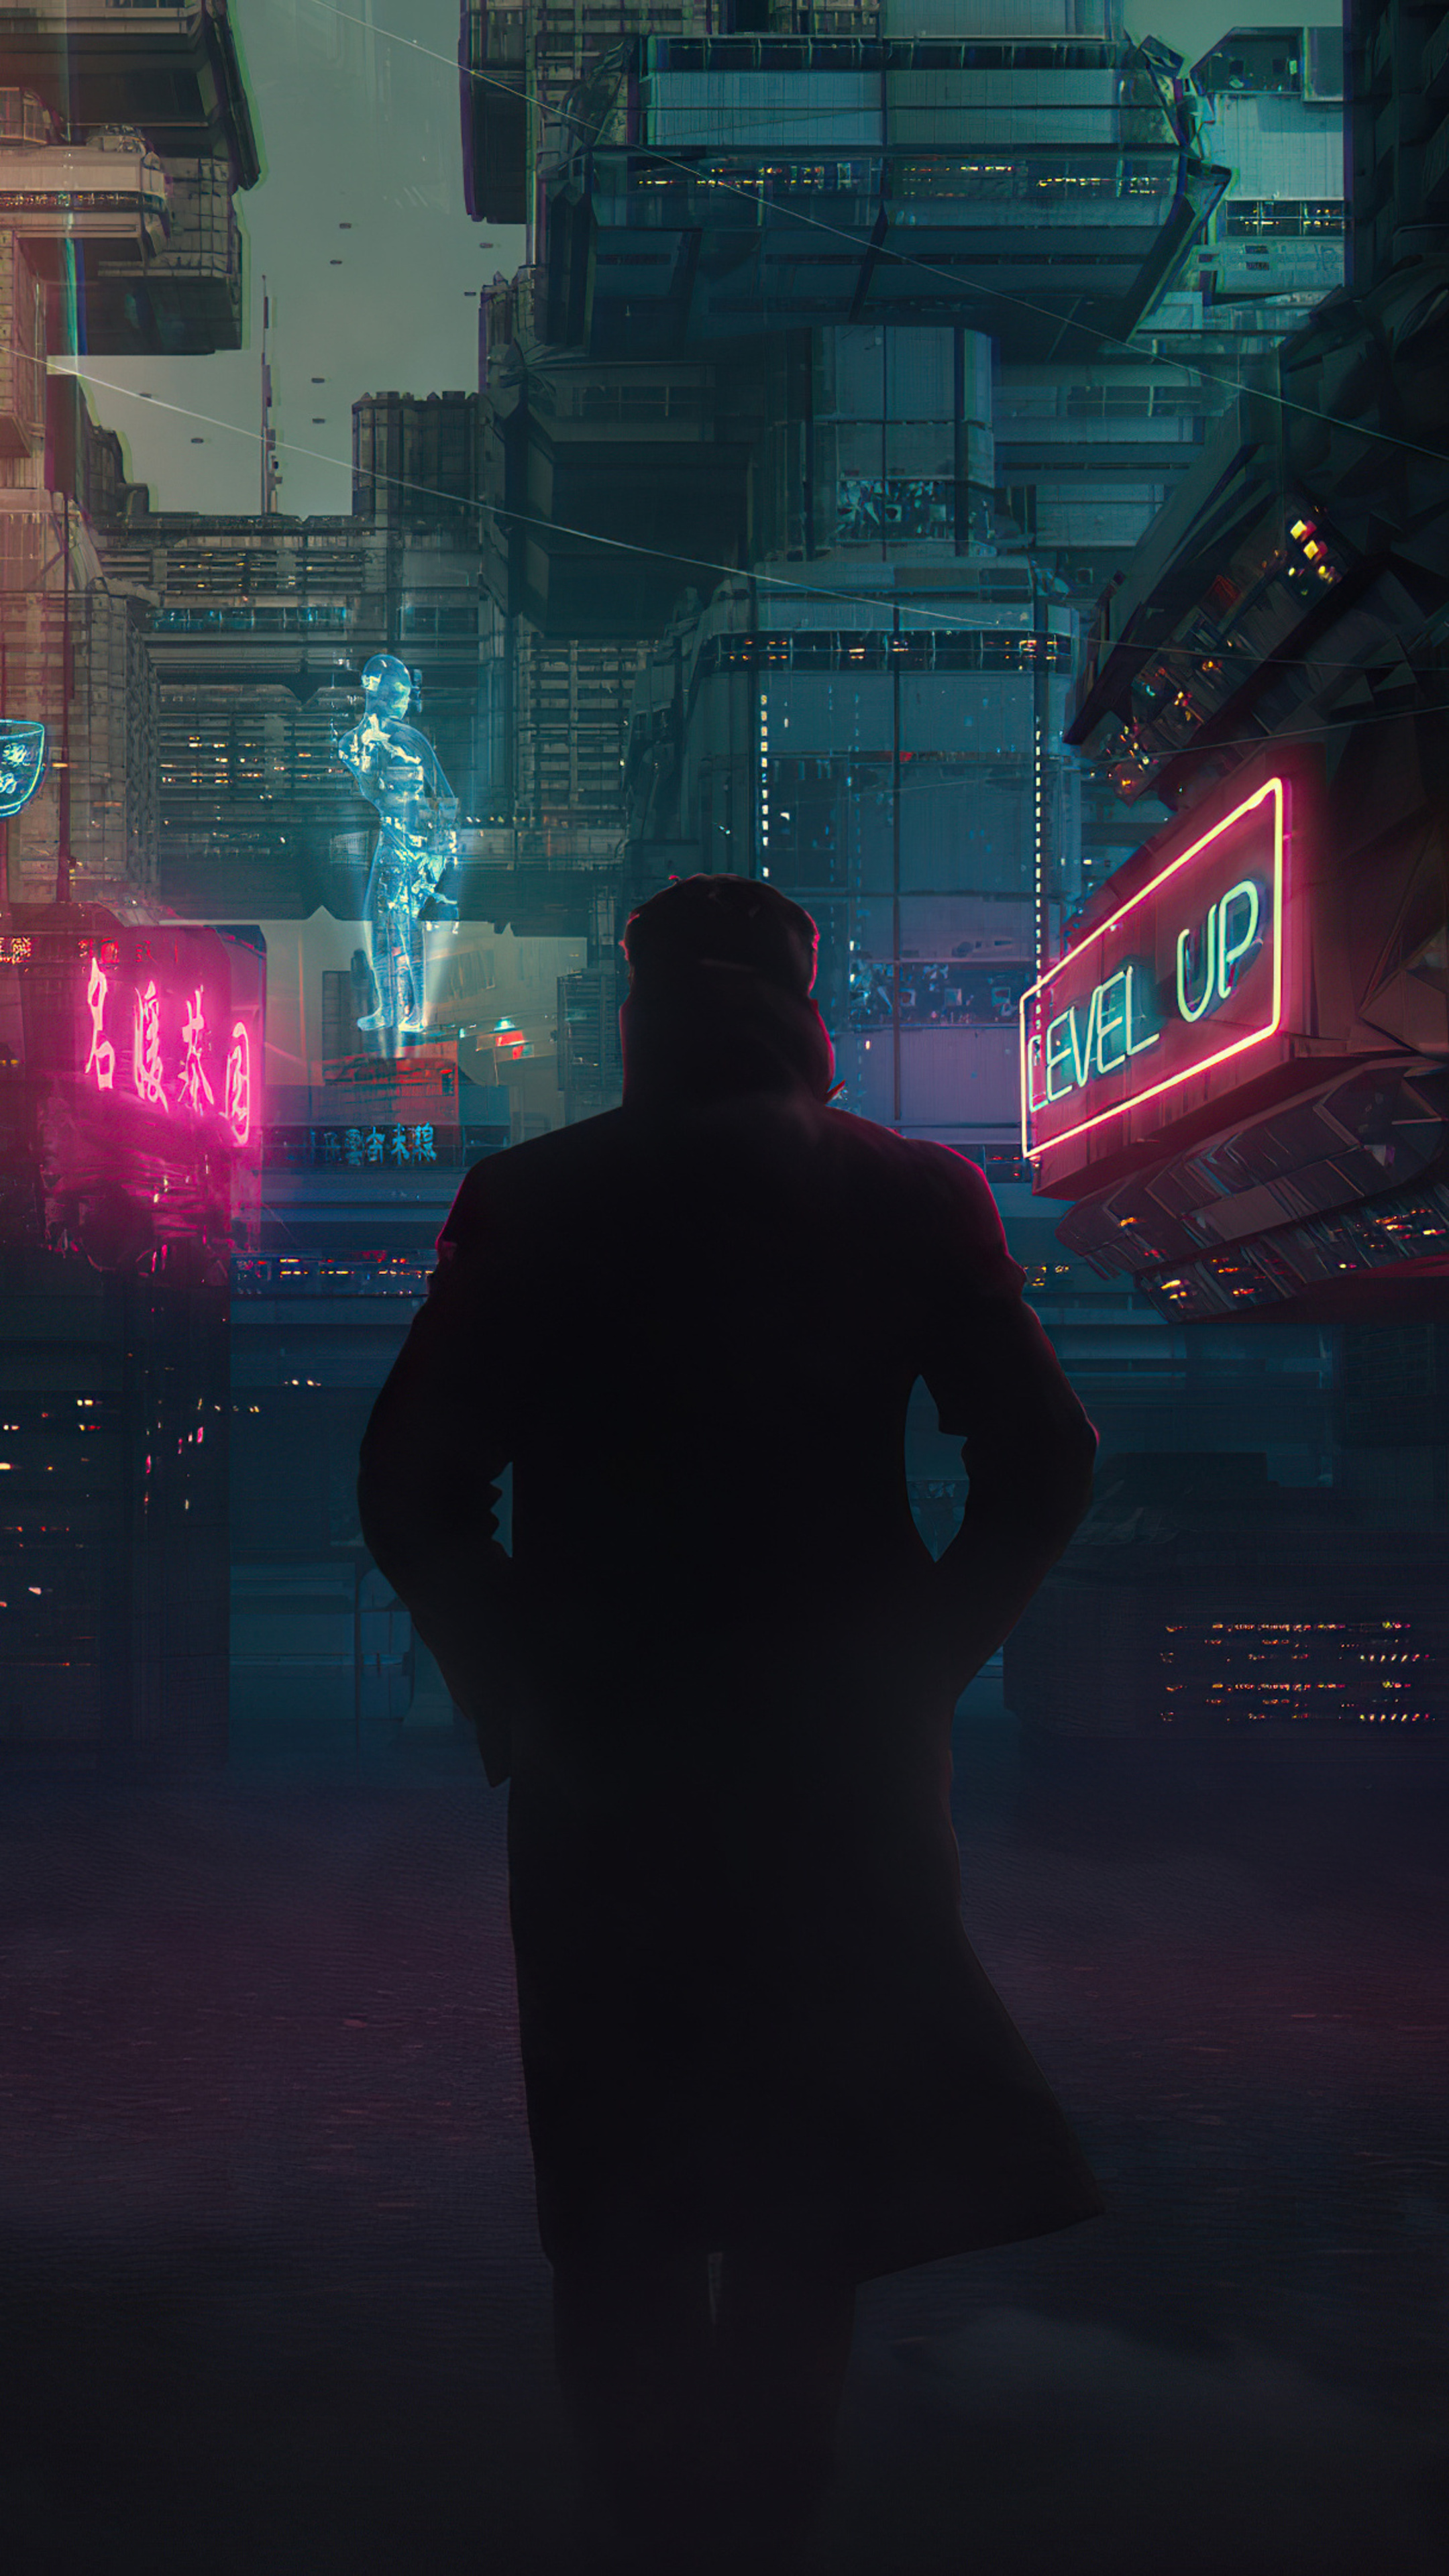 Blade Runner 2049 cyberpunk alley, 4K Sony Xperia wallpapers, HD images, 2160x3840 4K Phone